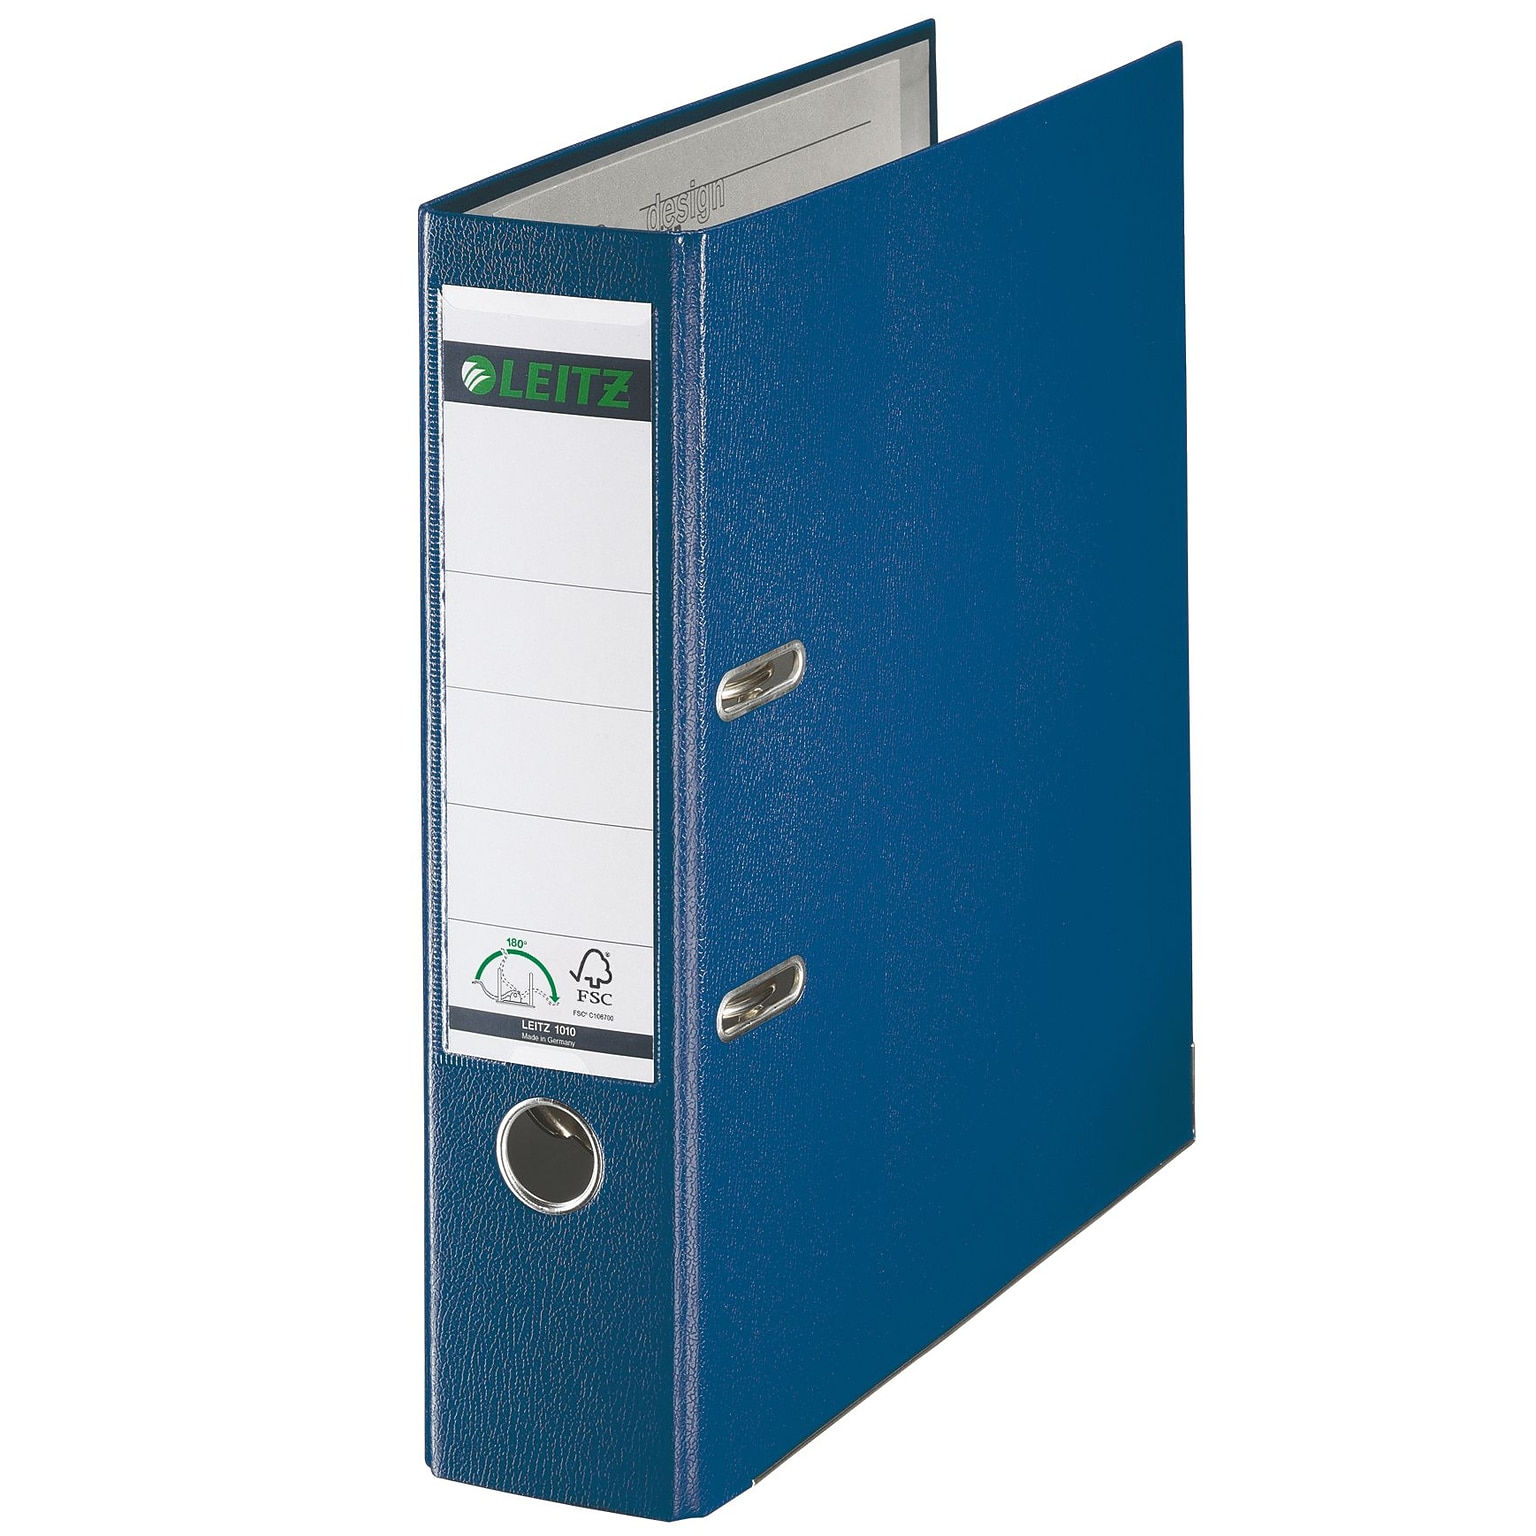 Leitz 180 2 2-Ring A4 Binders, Blue (1010-BL)